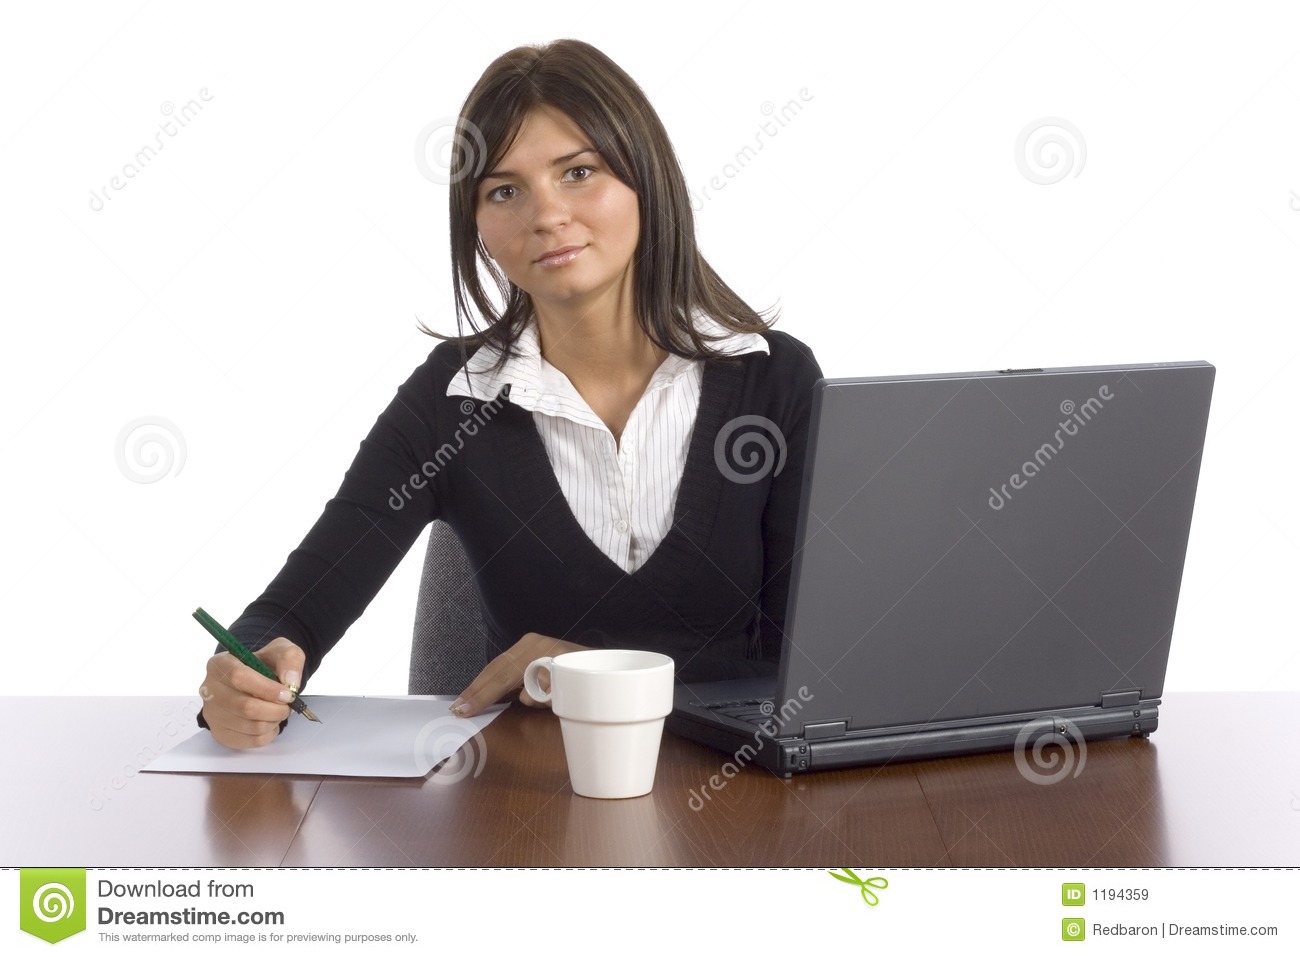 Female Office Worker Royalty Free Stock Images   Image  1194359